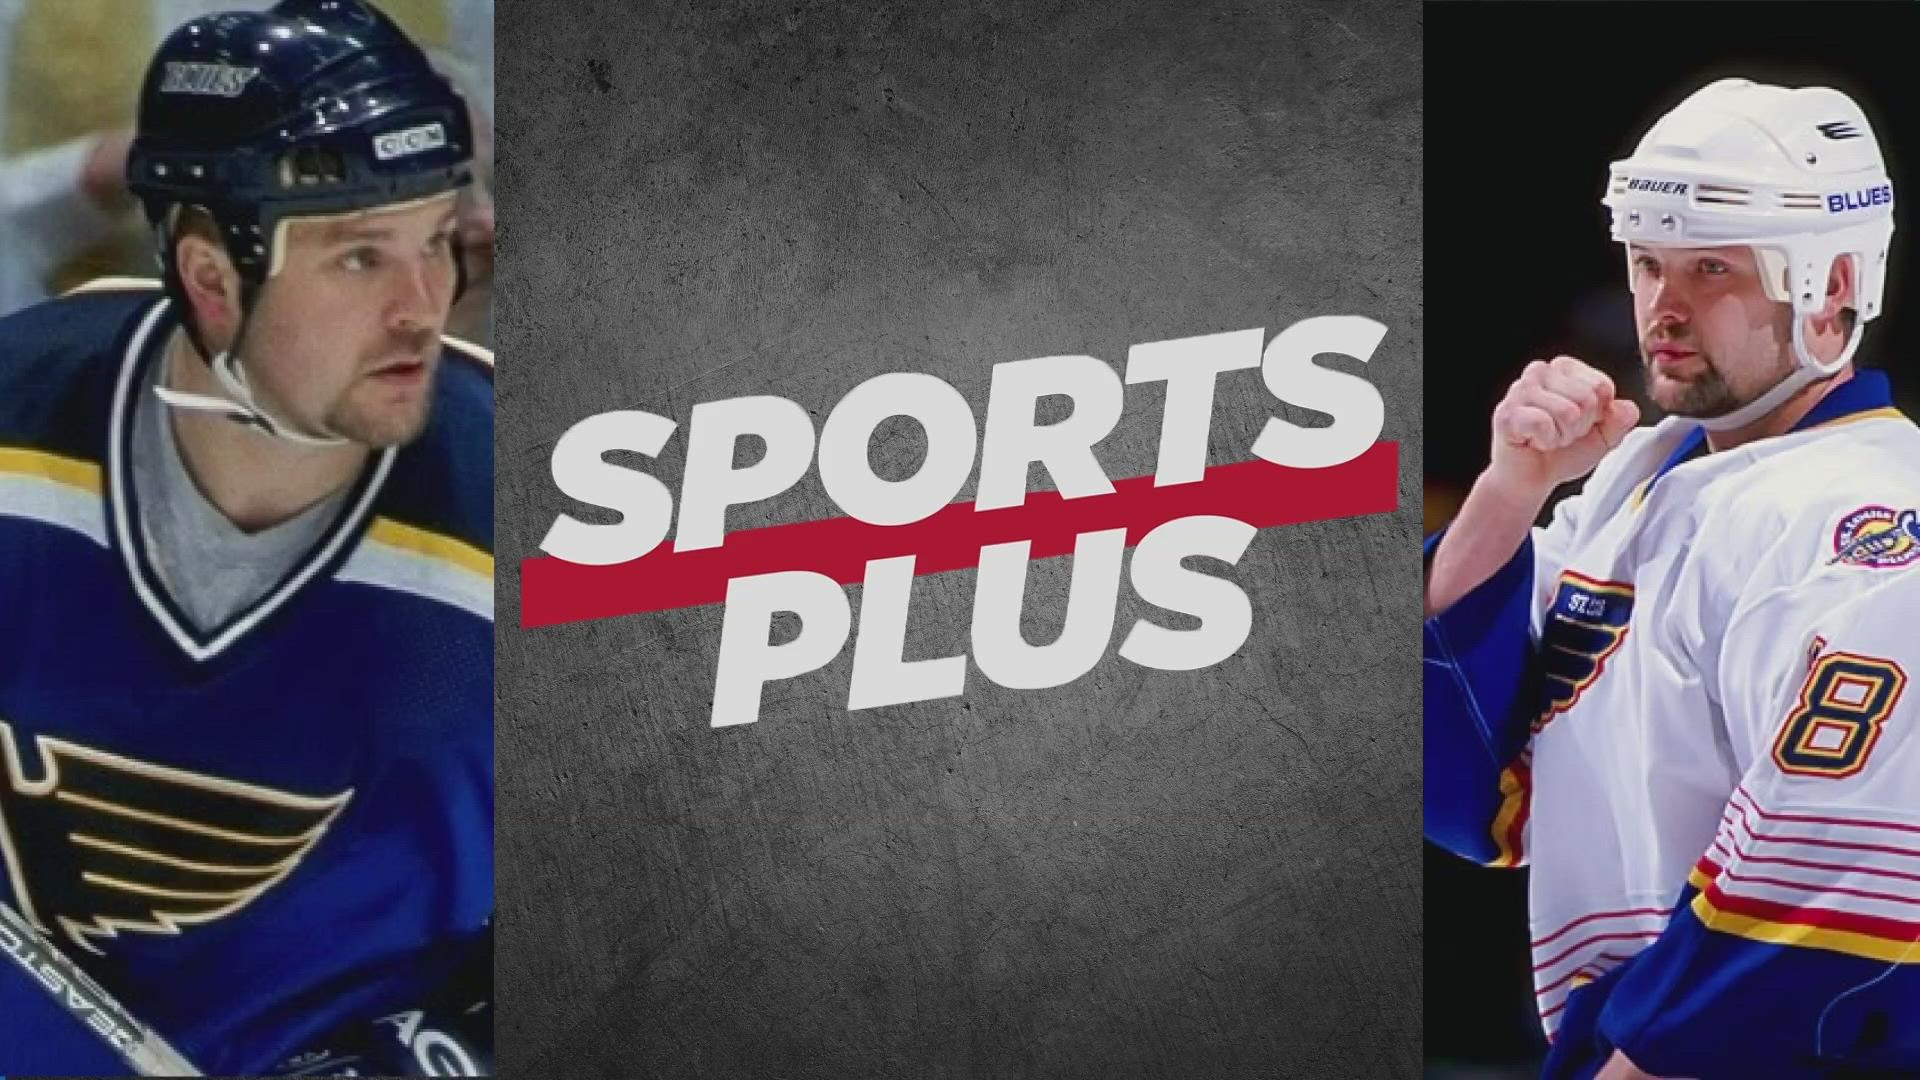 Join 5 On Your Side's Sports Plus Sunday, Feb. 5 at 10:30 p.m. Kelly Chase and Tony Twist will be live.